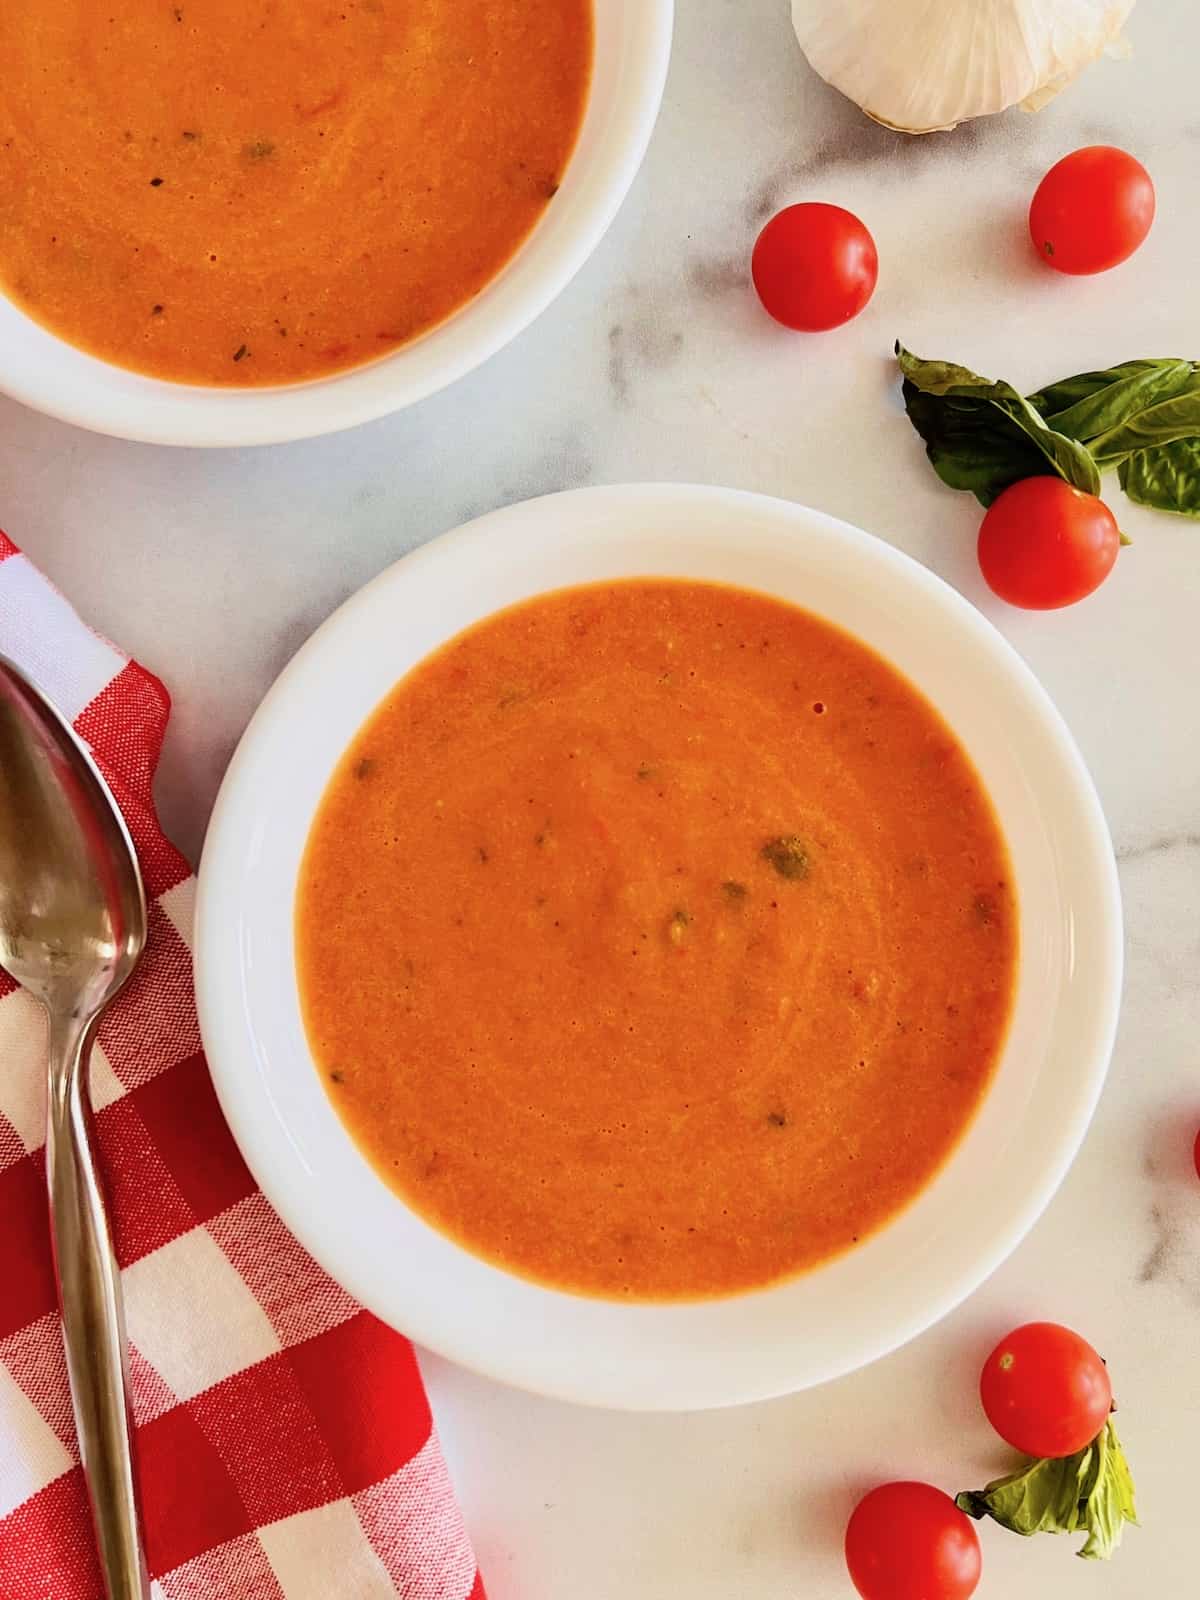 Overhead two bowls of tomato soup next to cherry tomatoes spoon napkin and basil leaves.